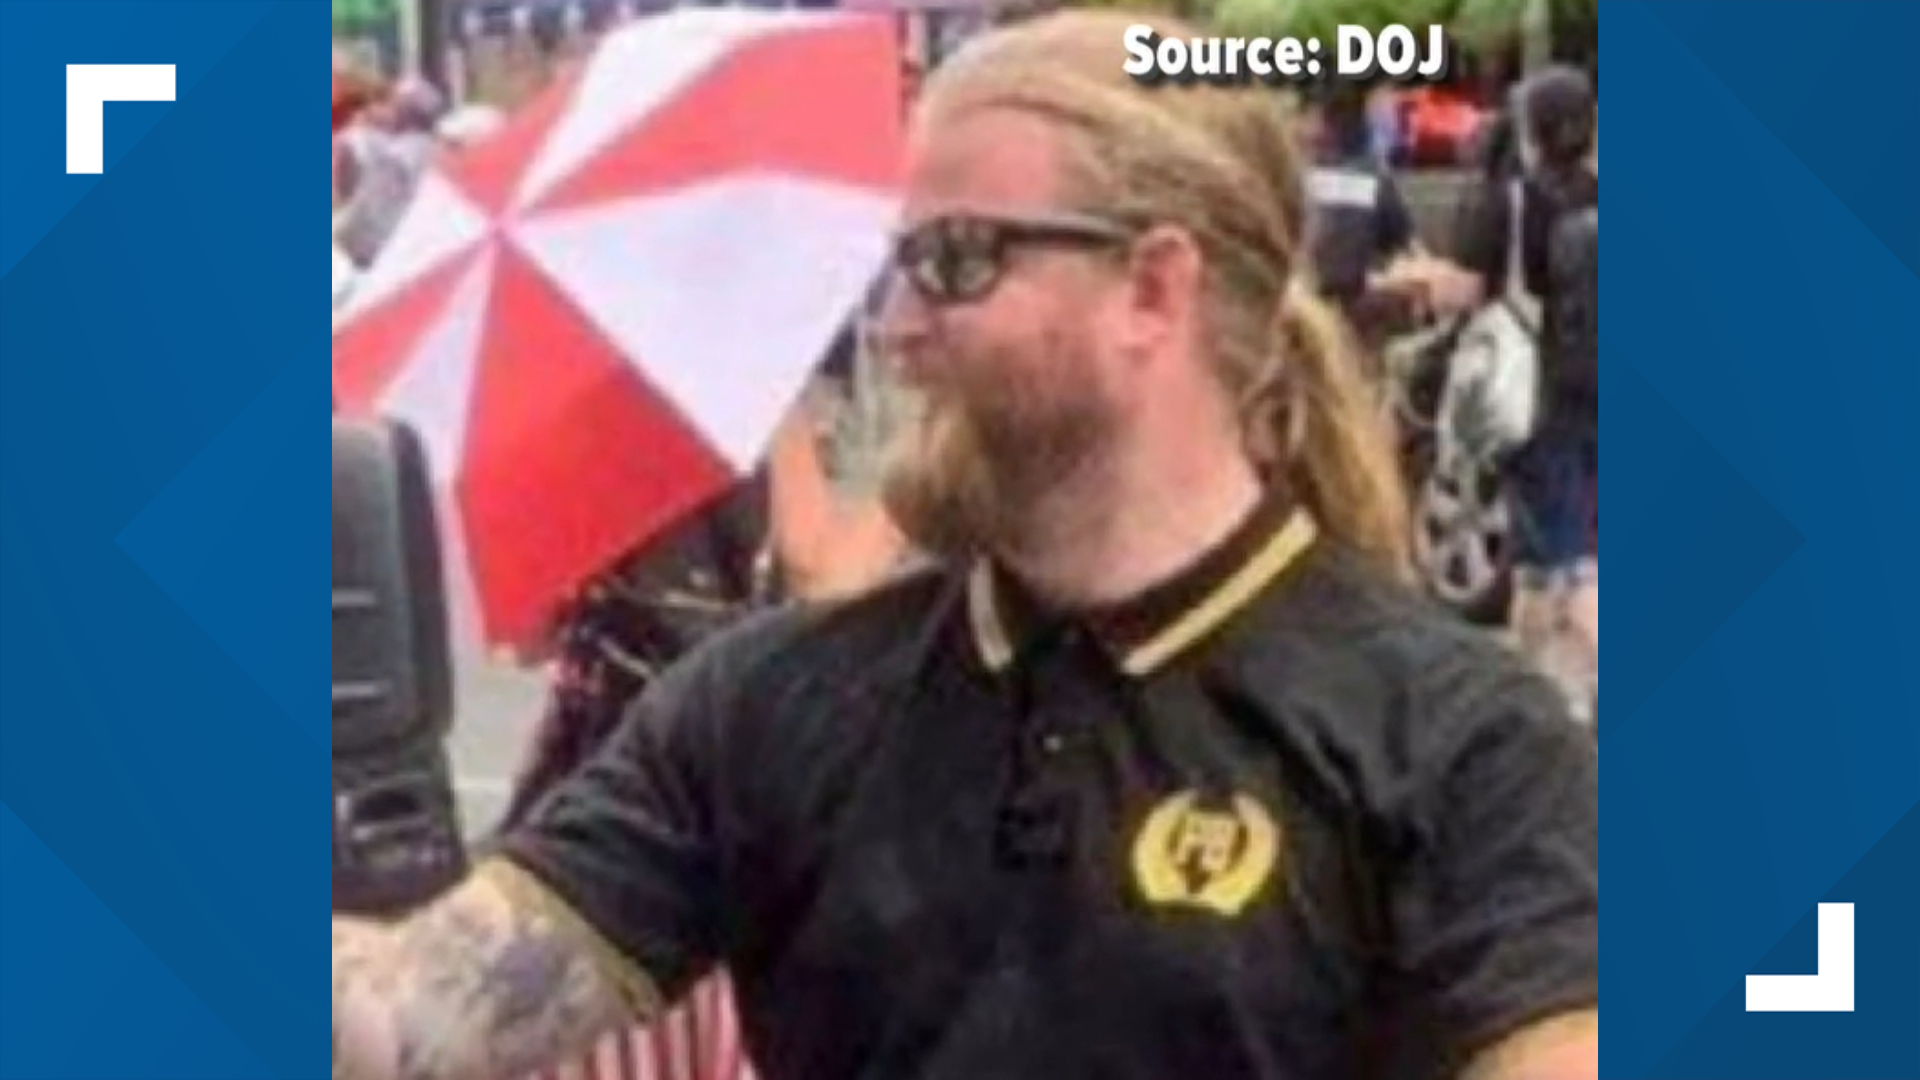 Charles Donohoe is a member of the Proud Boys. He was charged in connection to the deadly riot on the U.S. Capitol.